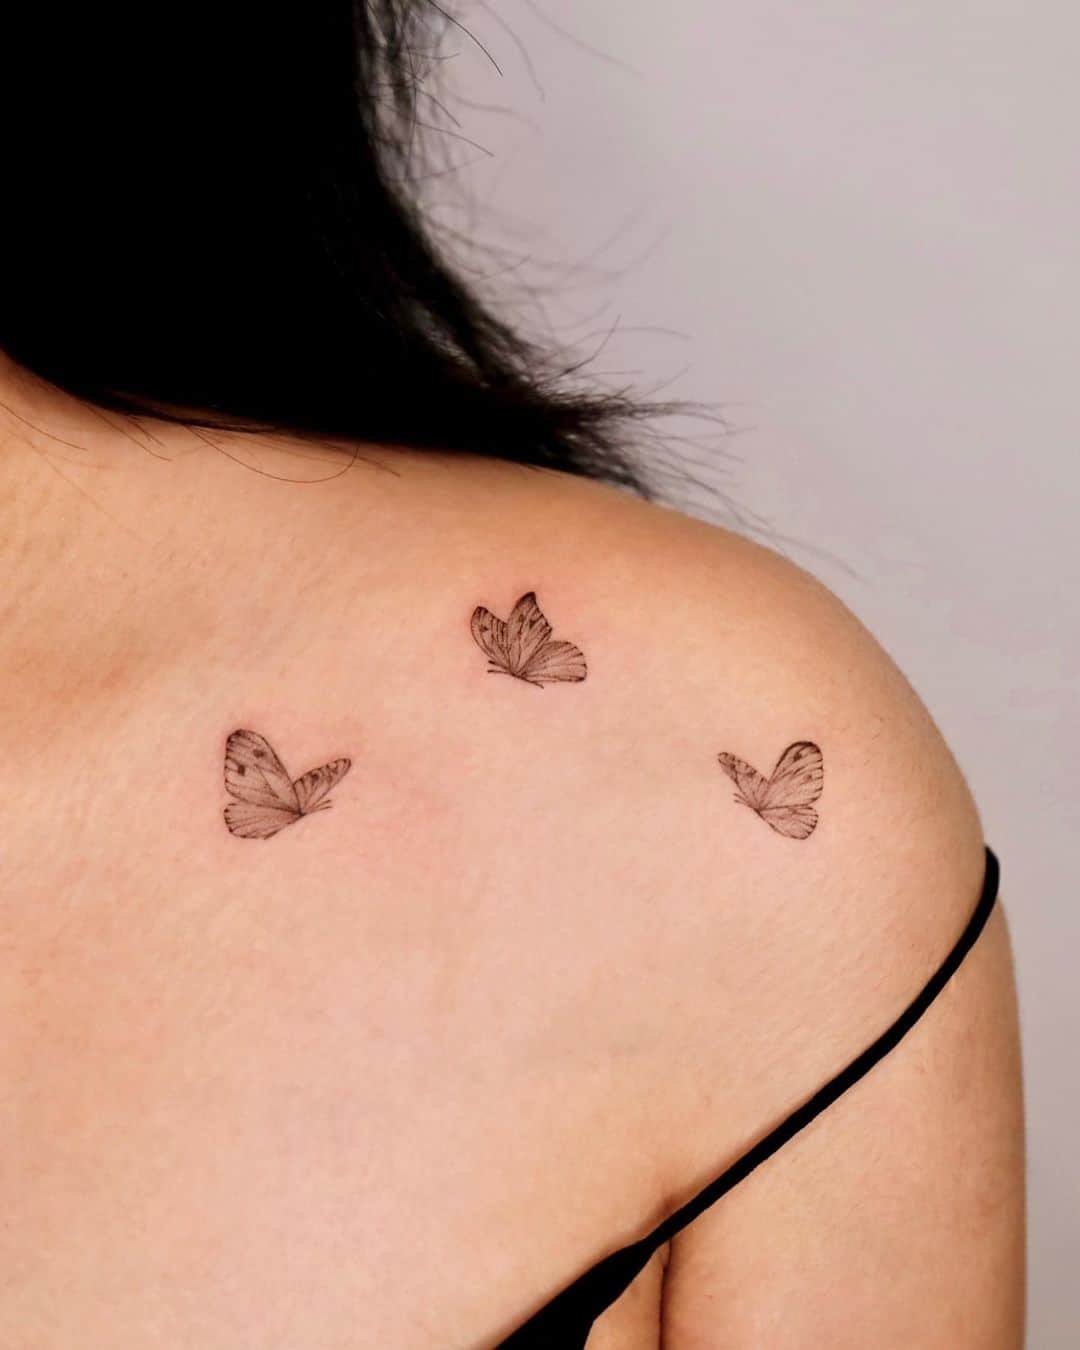 Simple butterfly tattoo by tattooist gaon